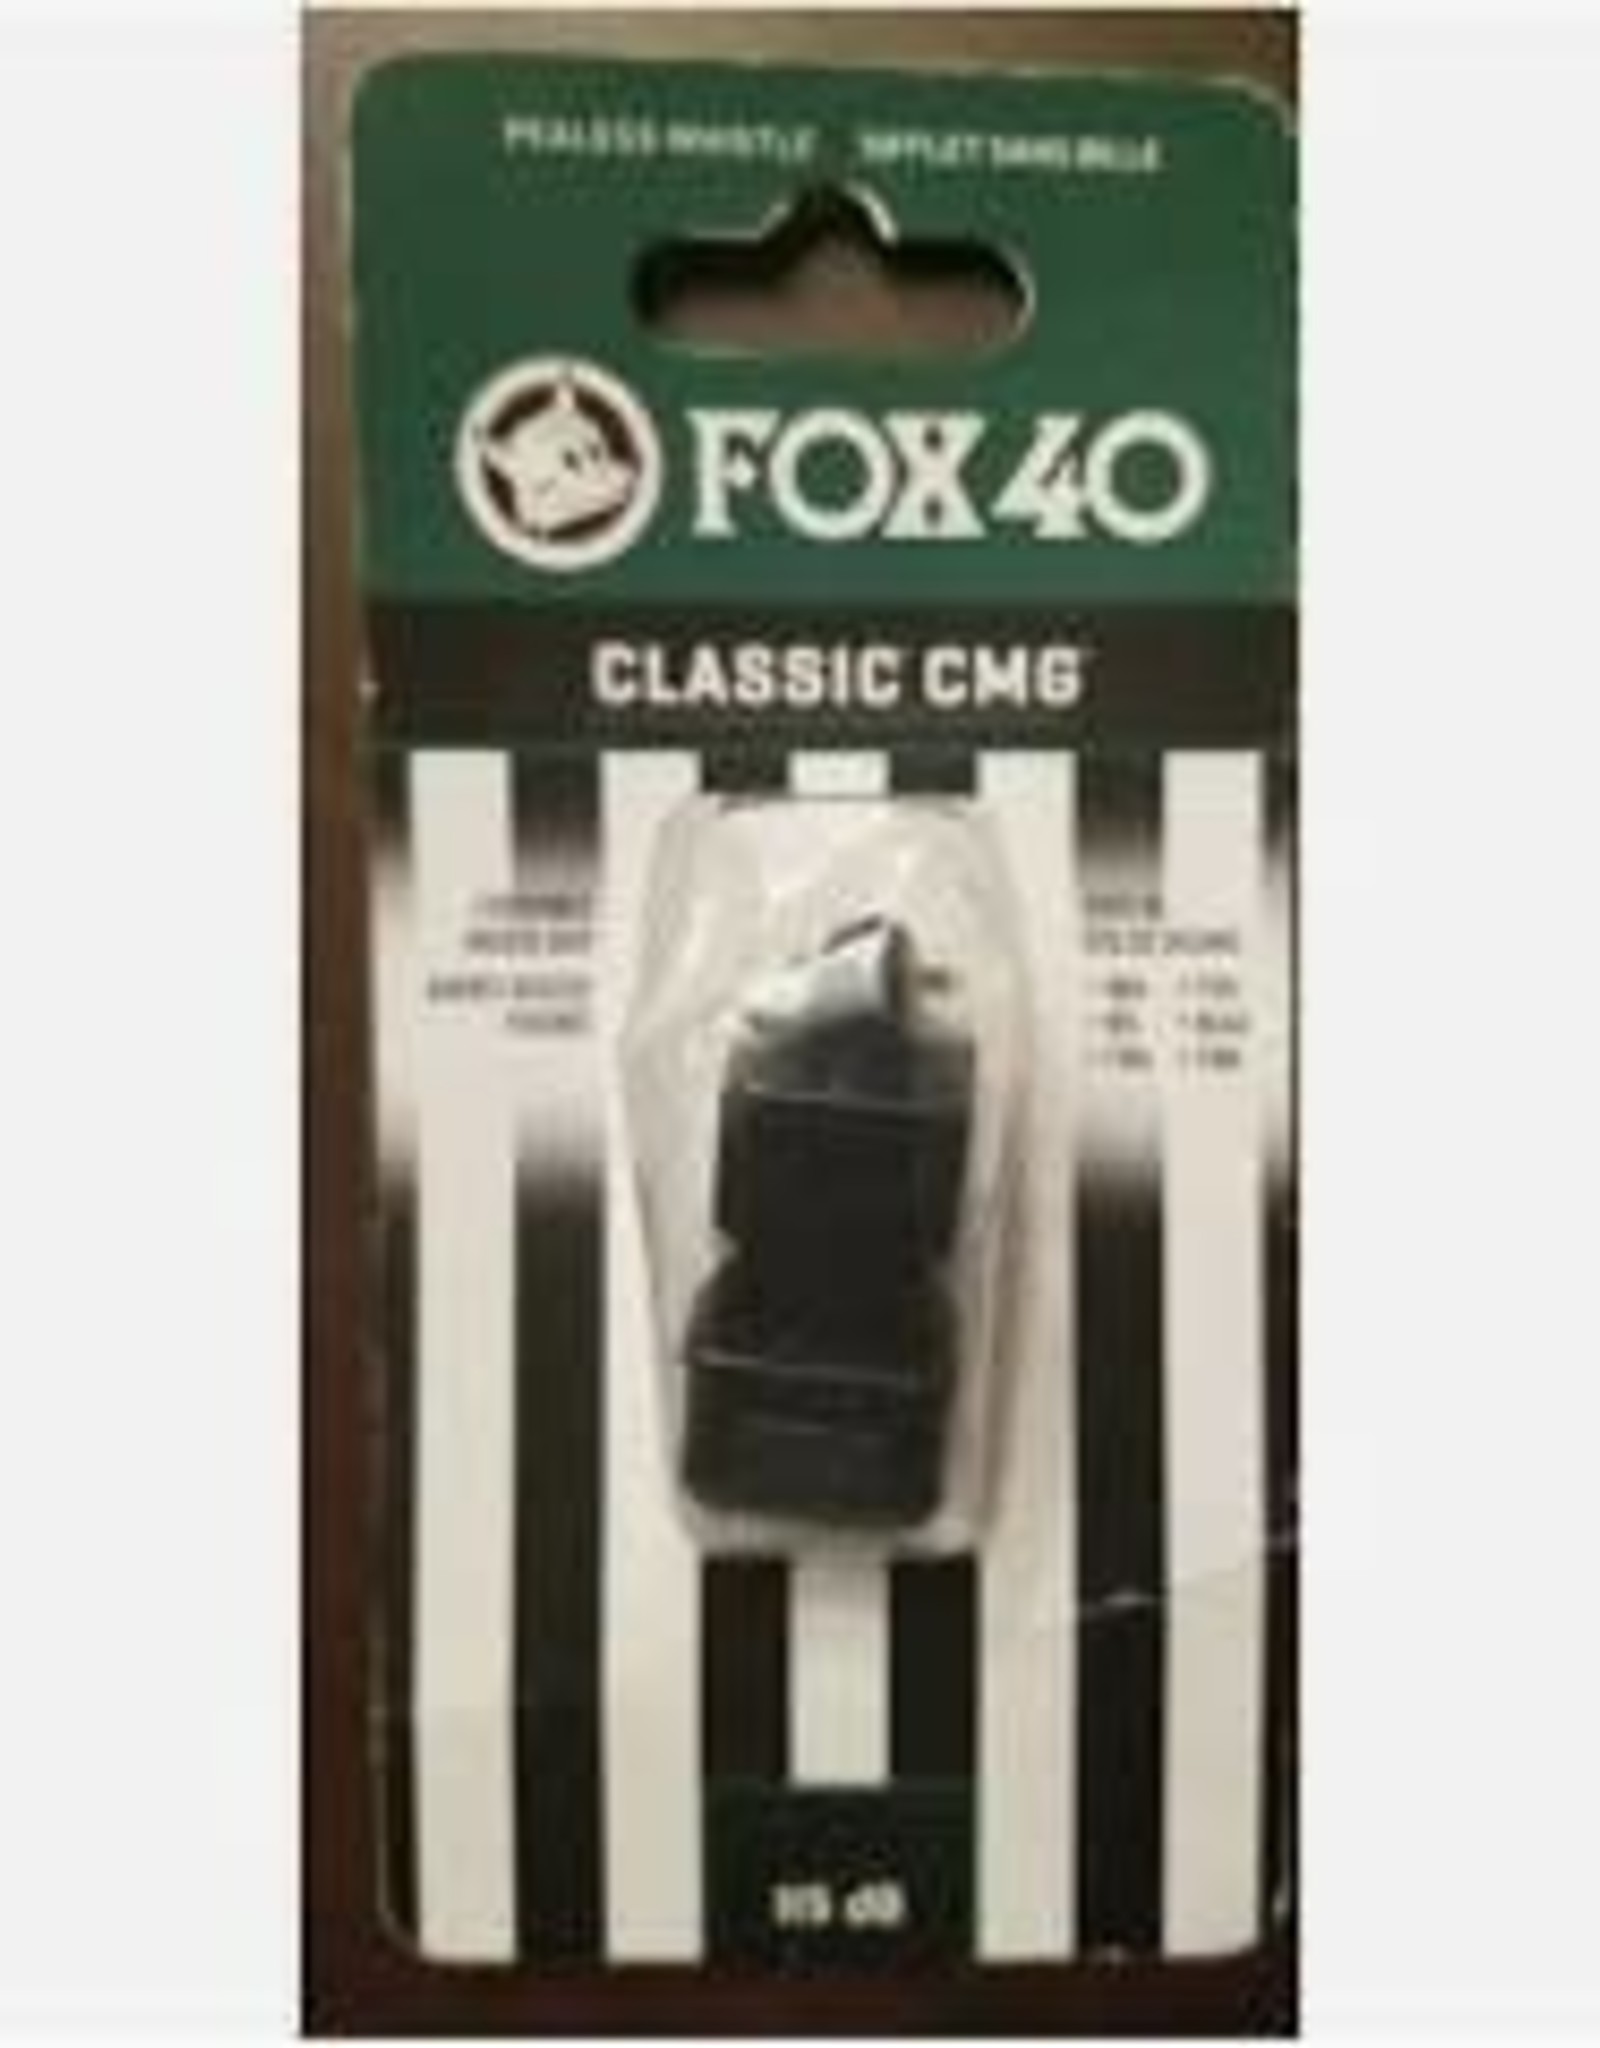 FOX 40 Fox 40 Classic CMG Pealess Whistle